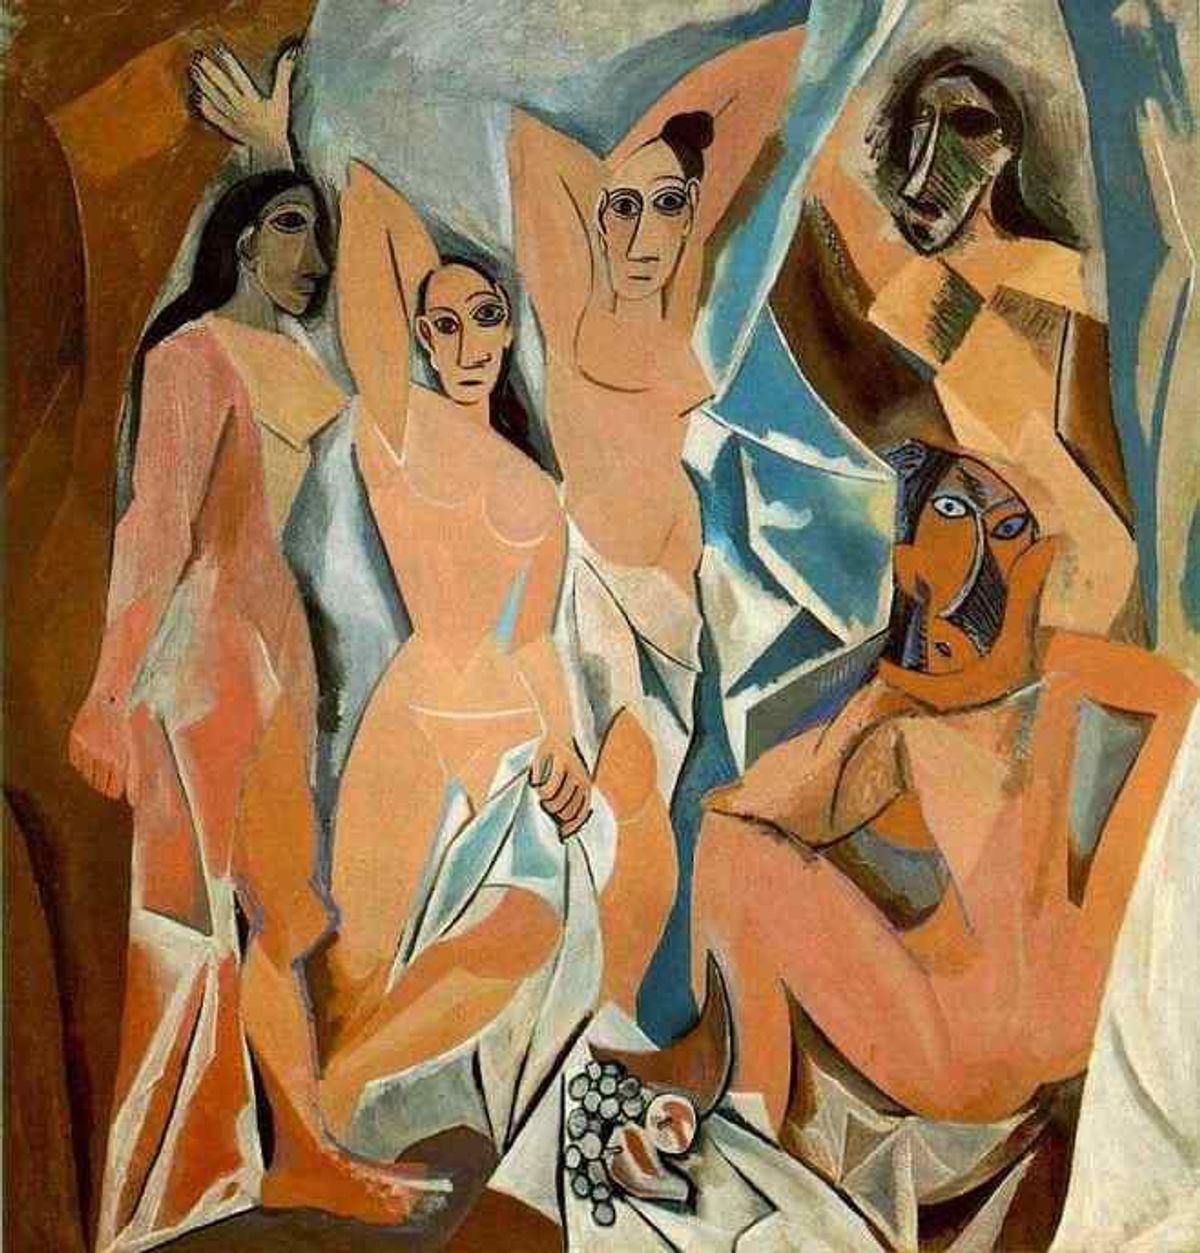 Picasso's Break From Conventions